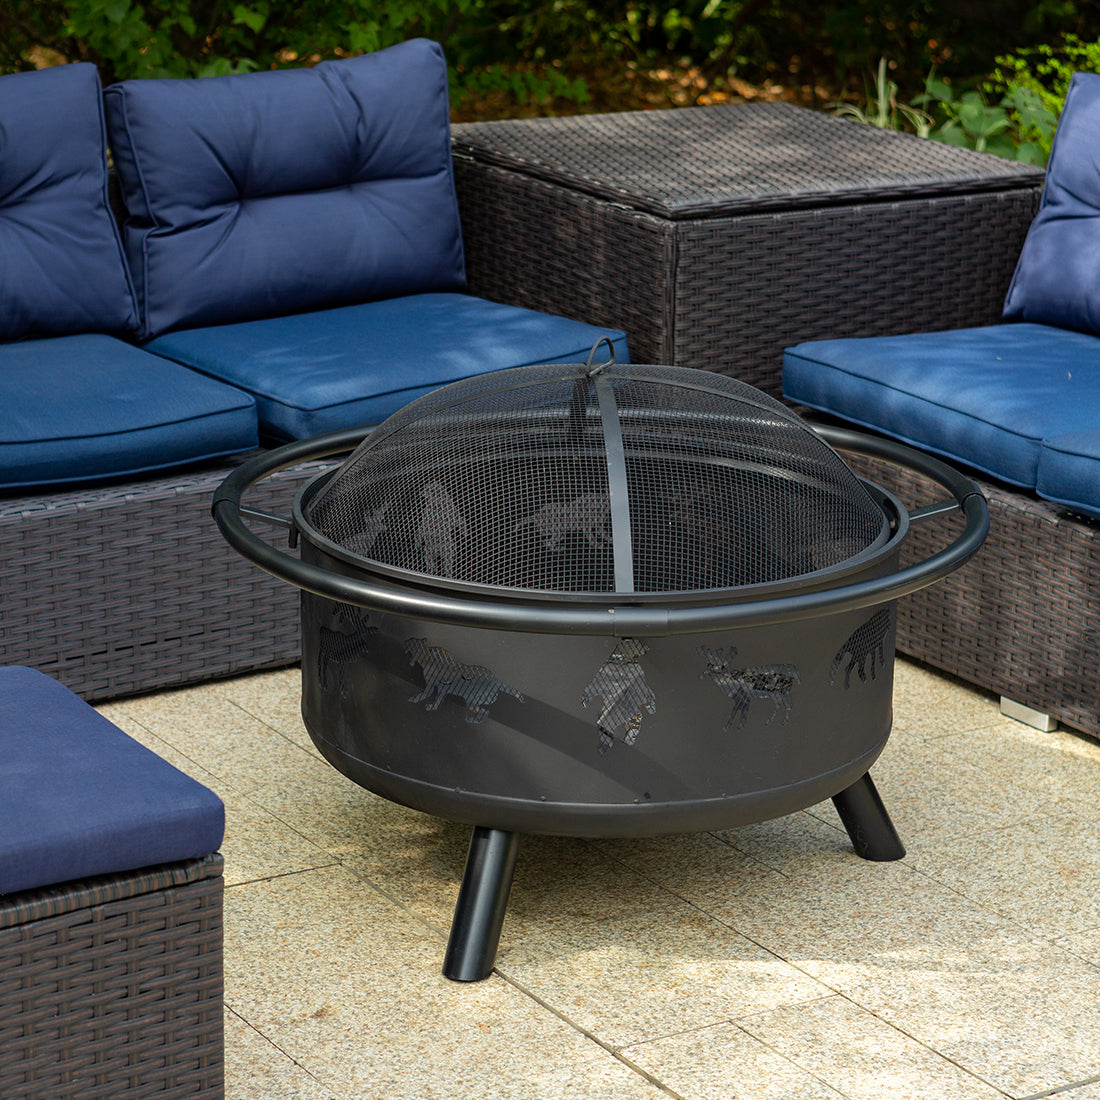 PHI VILLA 36" Animal Shape Hollow-out Pattern Fire Pit with Lid & Poker